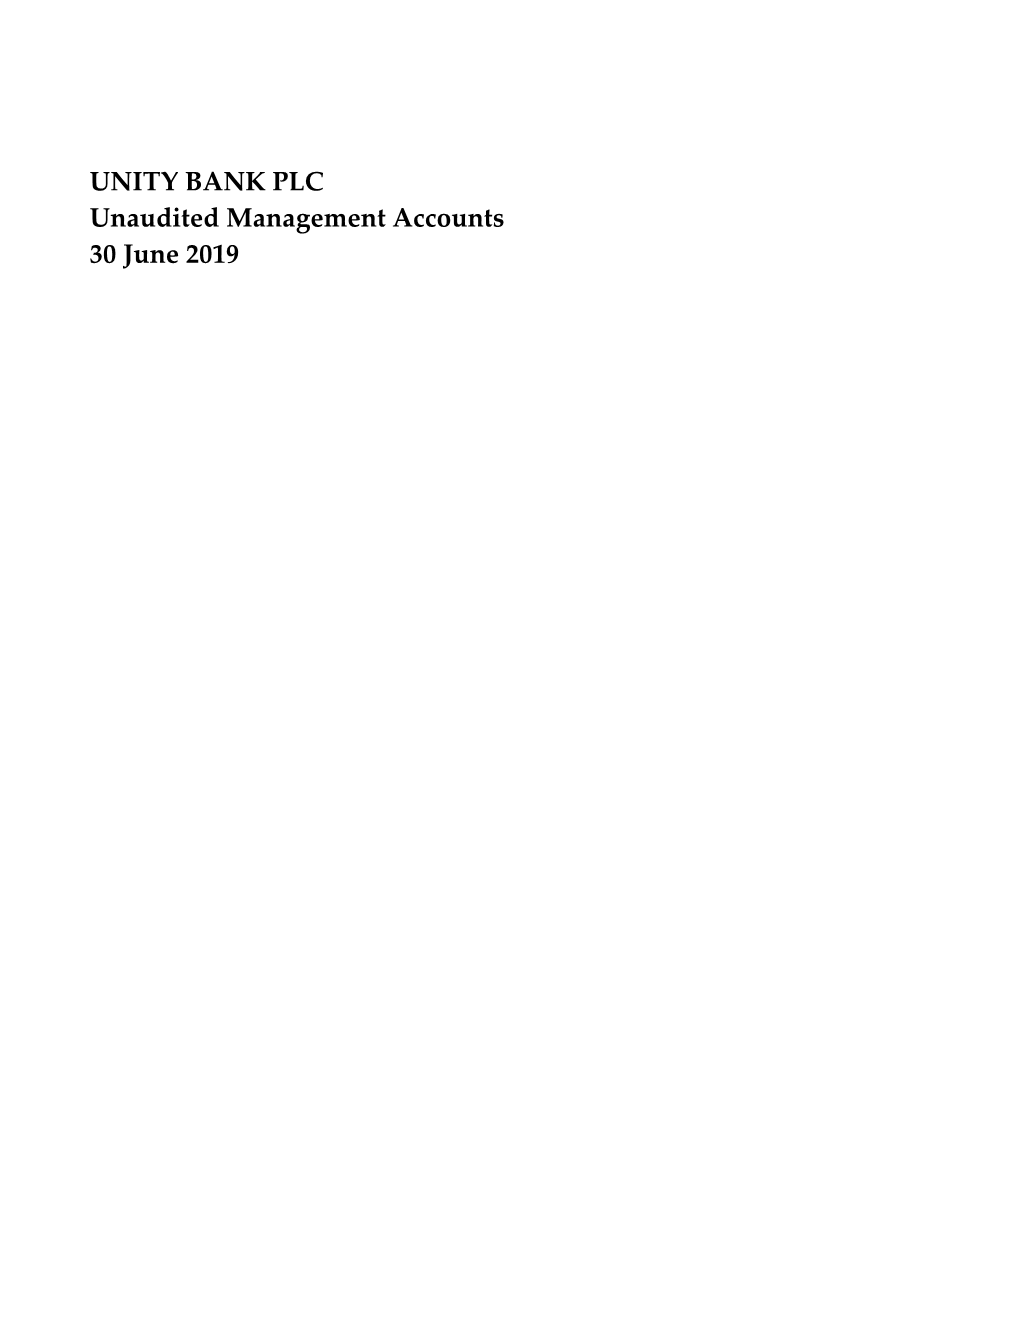 UNITY BANK PLC Unaudited Management Accounts 30 June 2019 UNITYBANK PLC STATEMENT of ACCOUNTING POLICIES